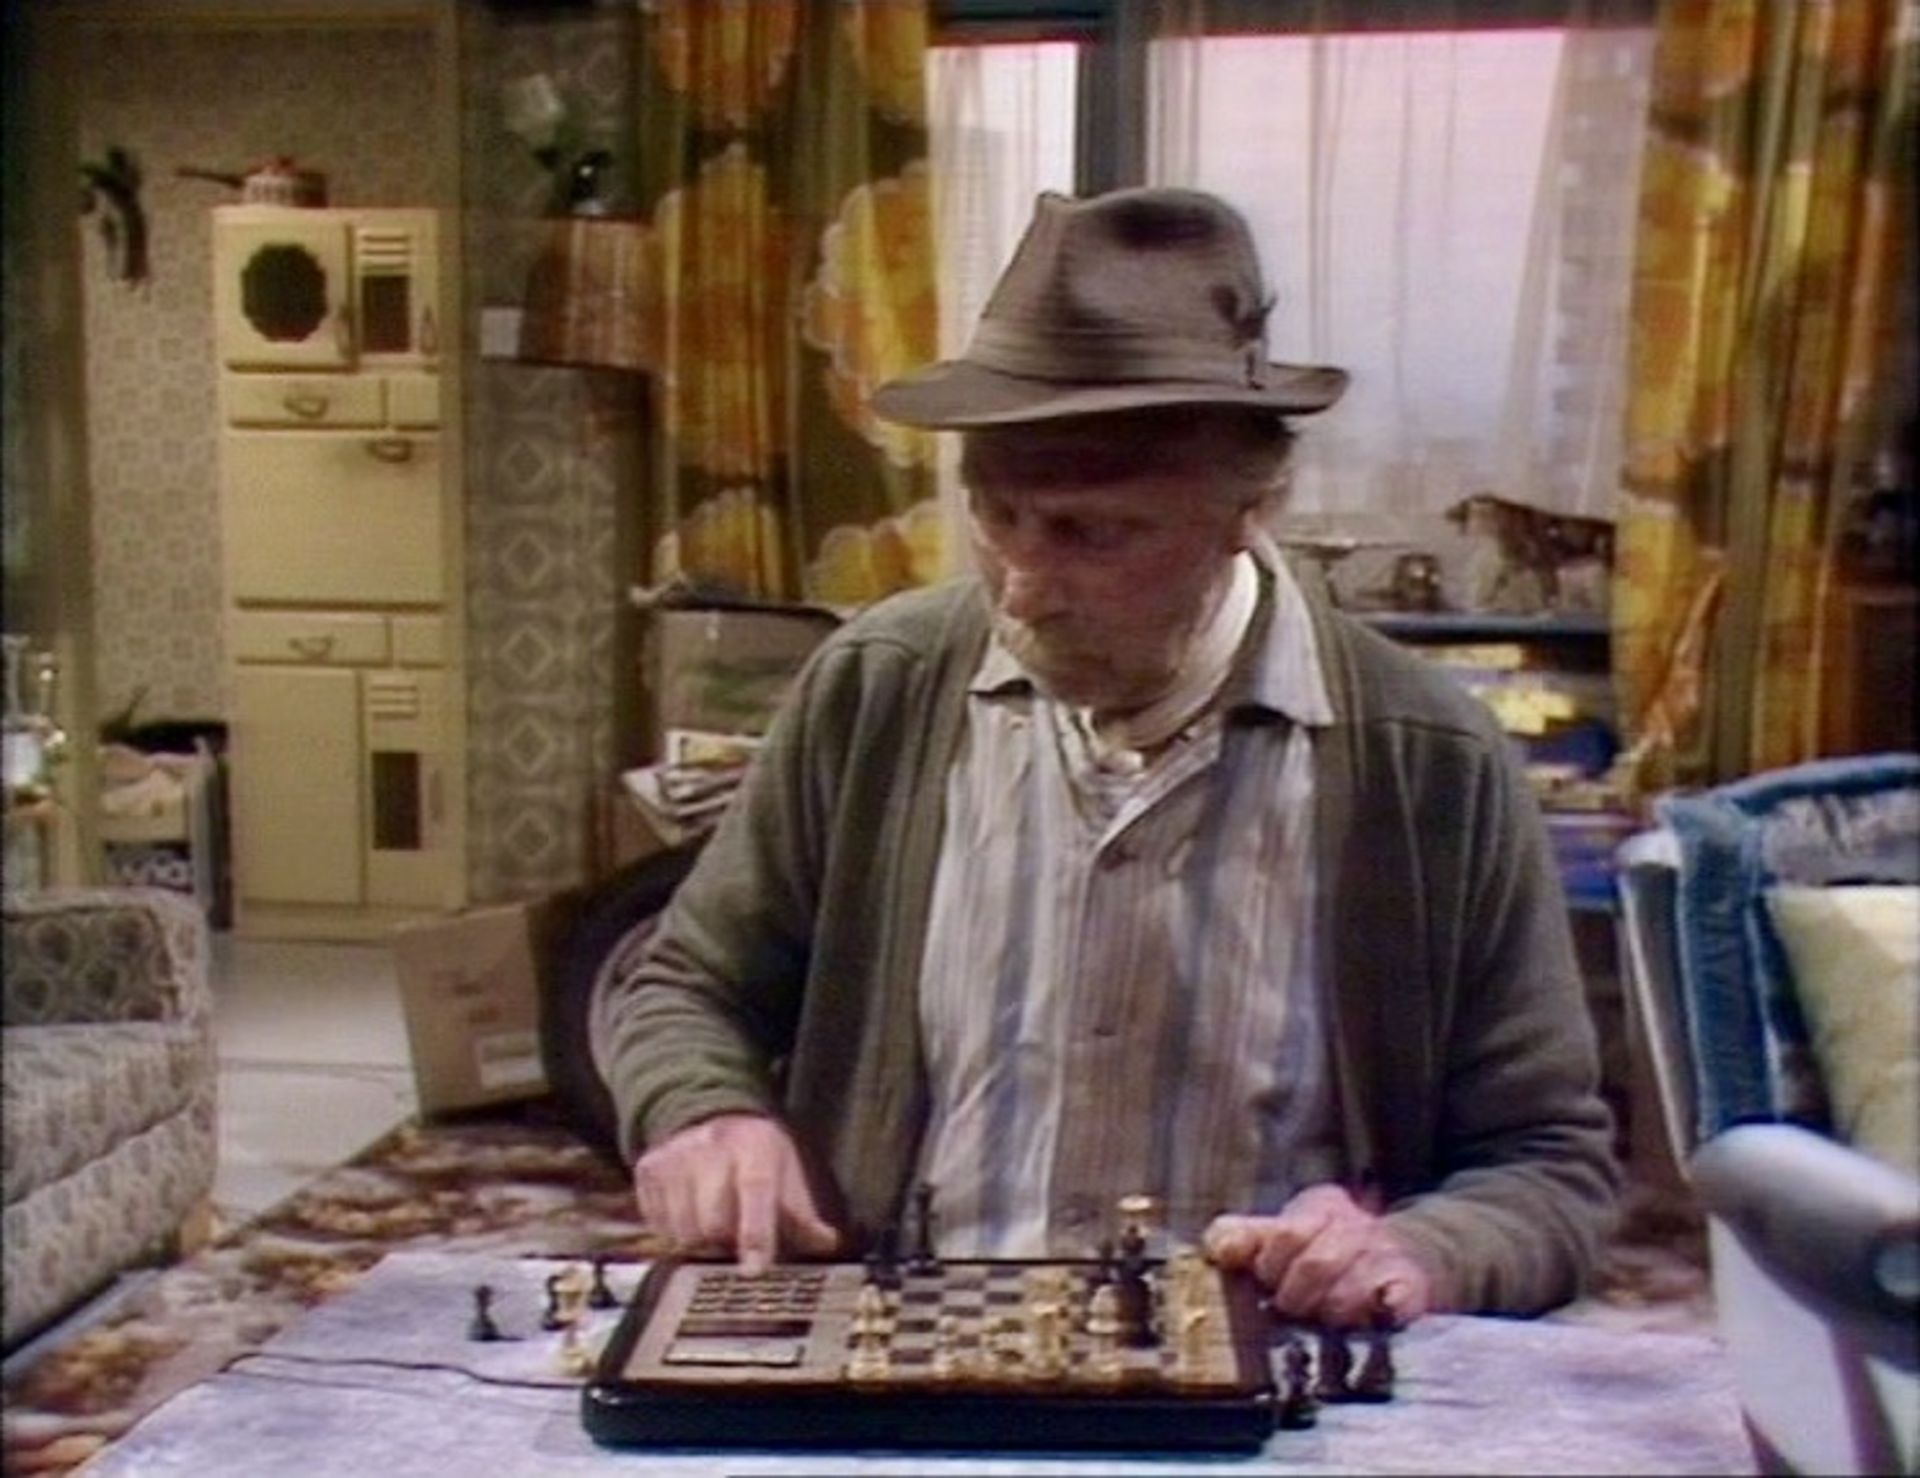 ONLY FOOLS & HORSES - SIR DAVID JASON SIGNED TALKING CHESS GAME - Image 6 of 6